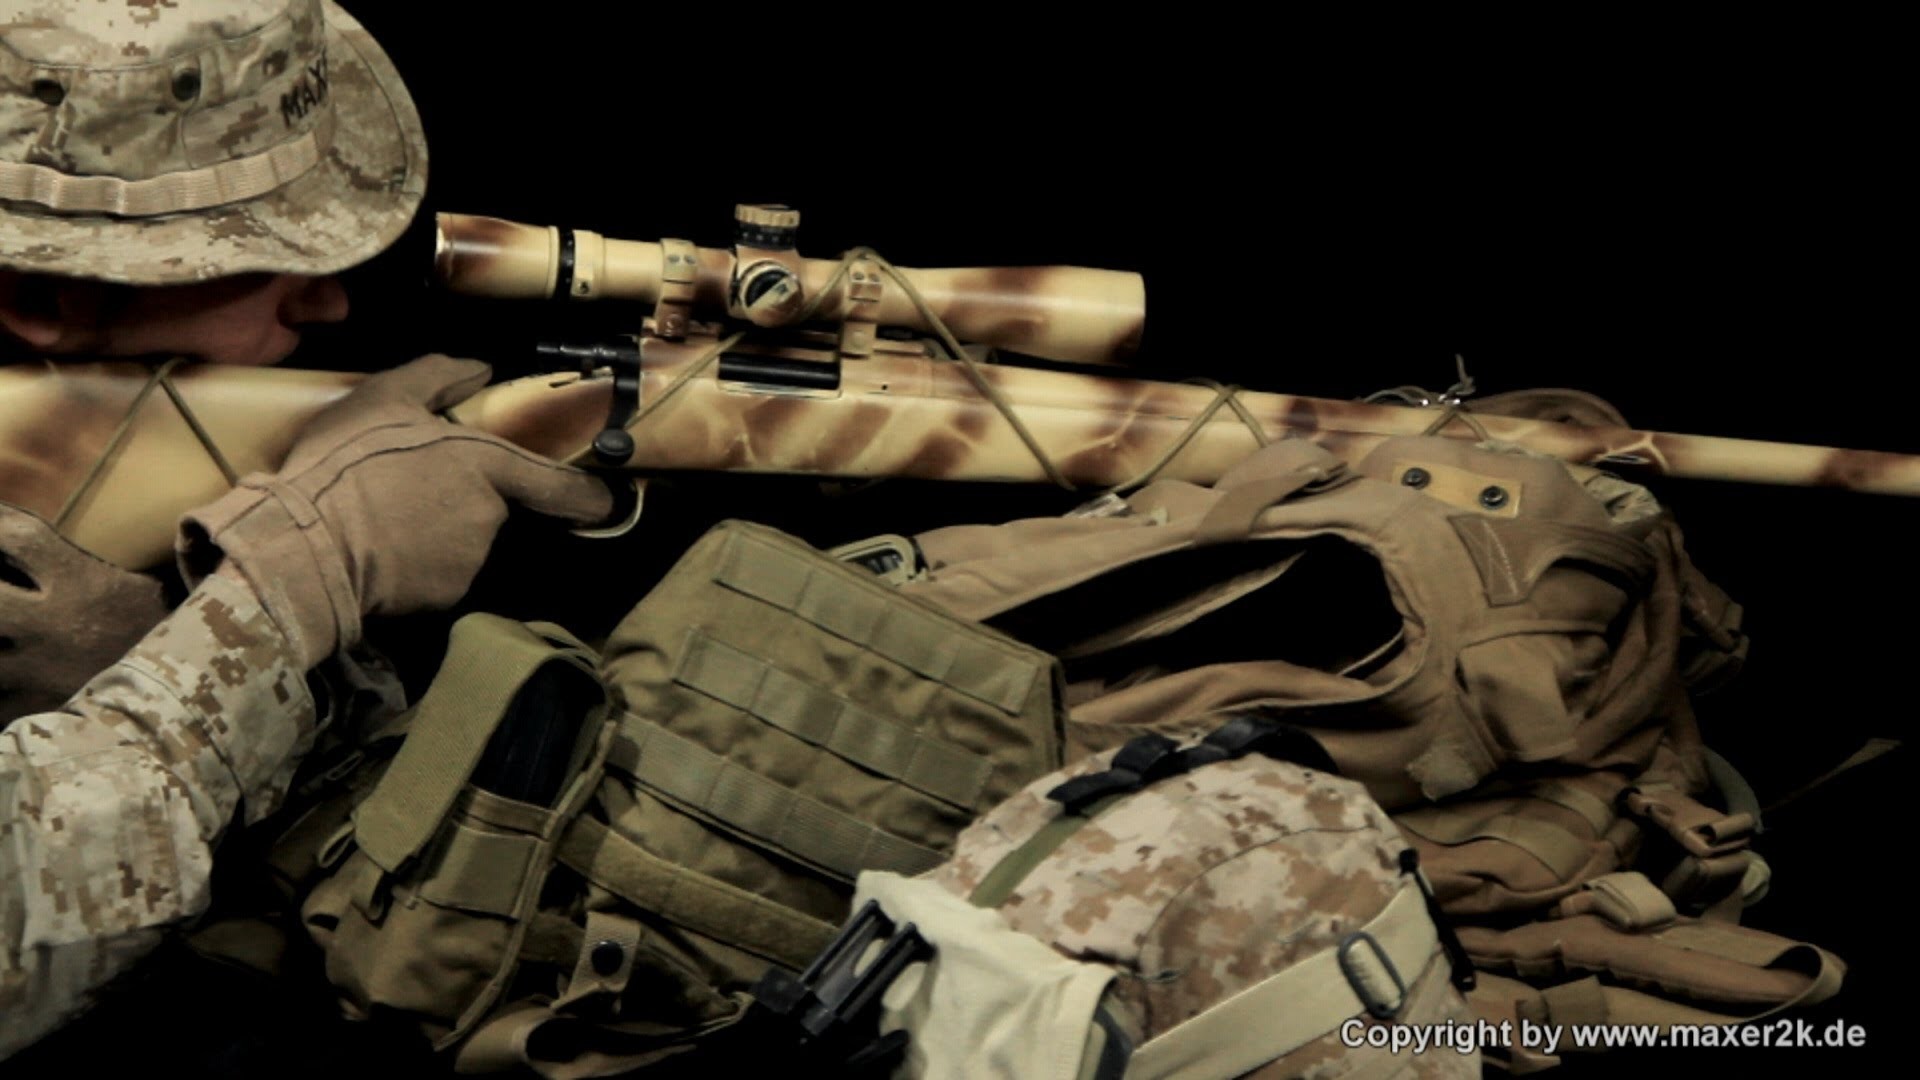 1920x1080 Displaying 20 Images For Marine Scout Sniper Wallpaper 